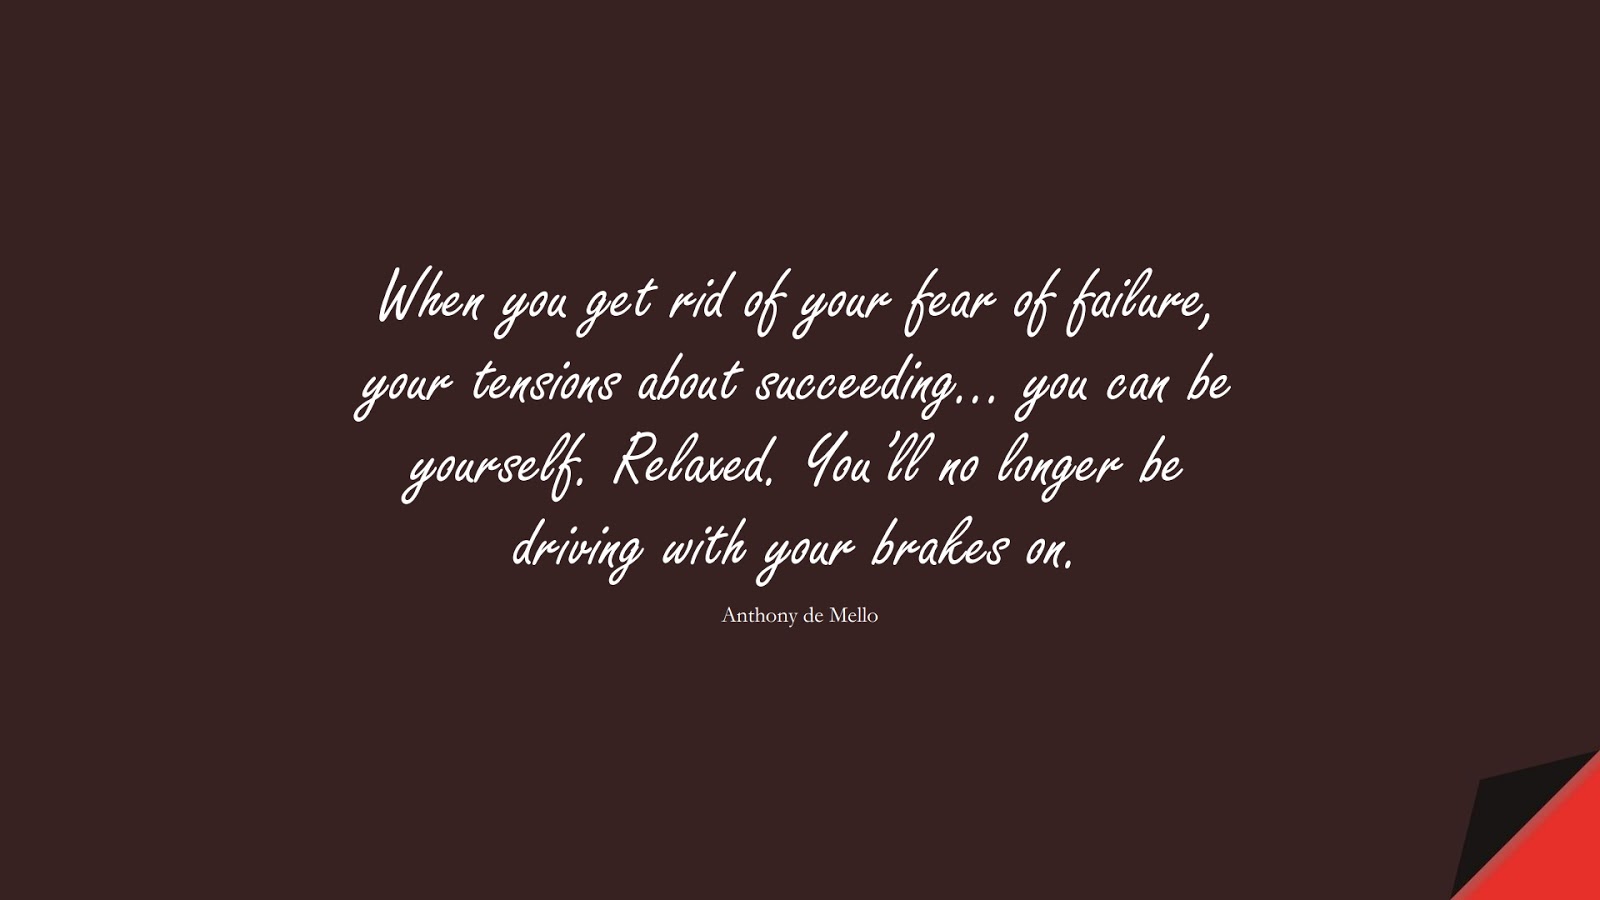 When you get rid of your fear of failure, your tensions about succeeding… you can be yourself. Relaxed. You’ll no longer be driving with your brakes on. (Anthony de Mello);  #FearQuotes